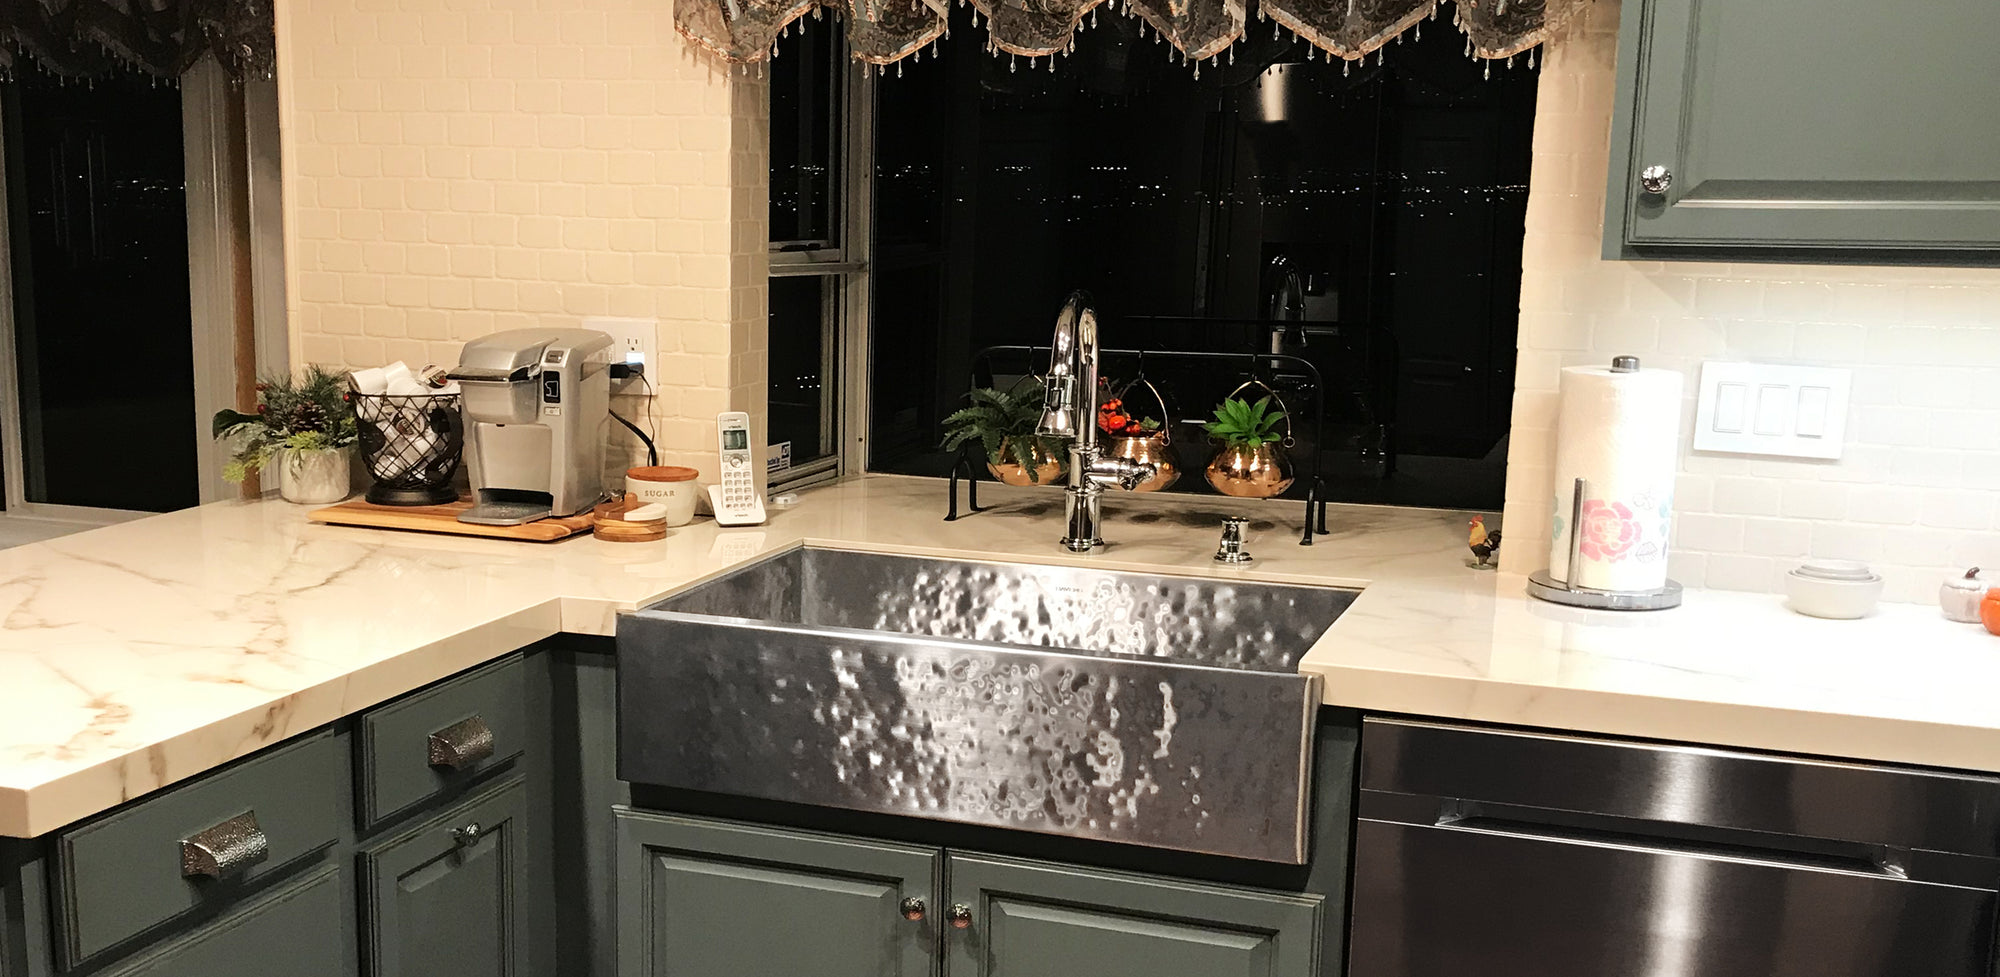 Hammered stainless steel farmhouse sink USA made by Havens Luxury Metals. White countertops made from natural stone with a heavy hammered finish. Custom made 